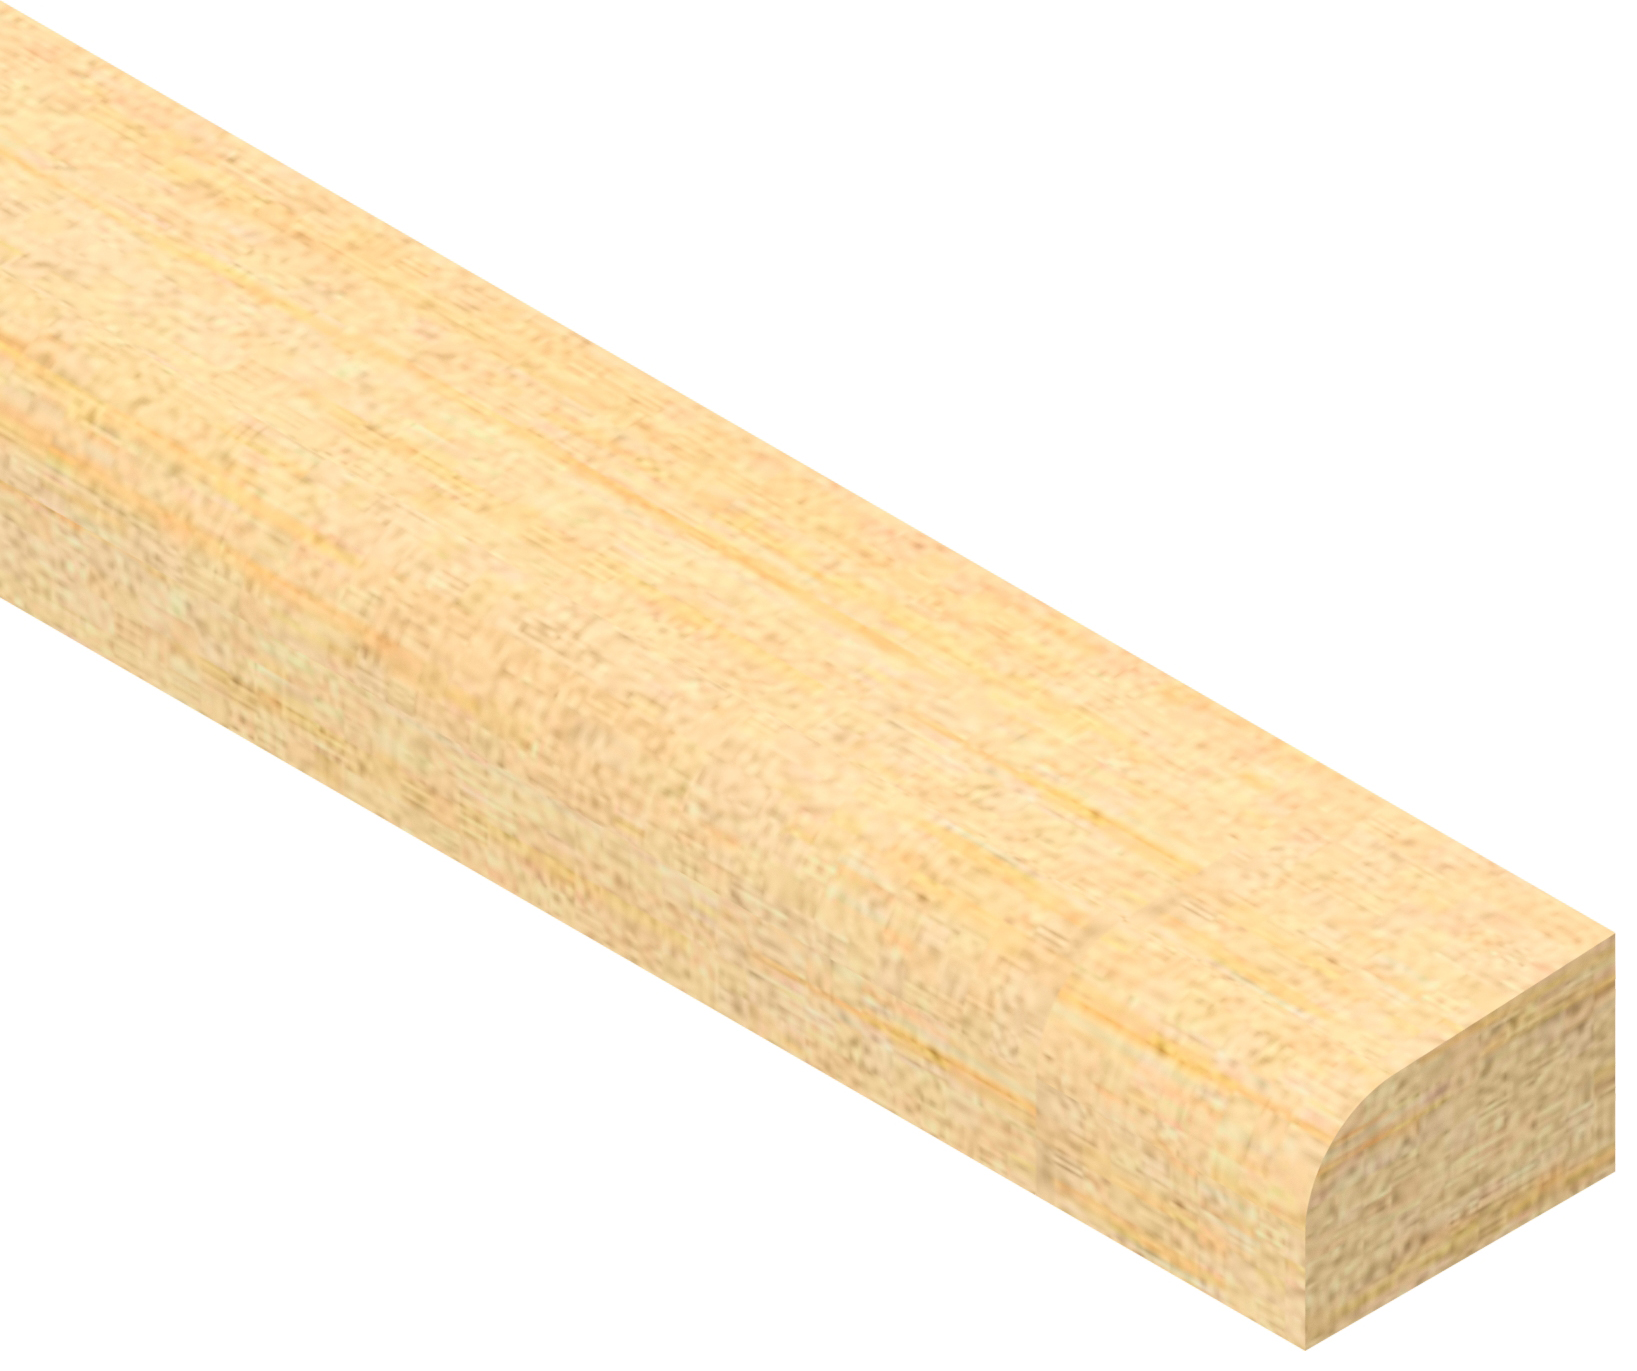 Wickes Pine Double Glass Bead Moulding - 15 x 9 x 2400mm